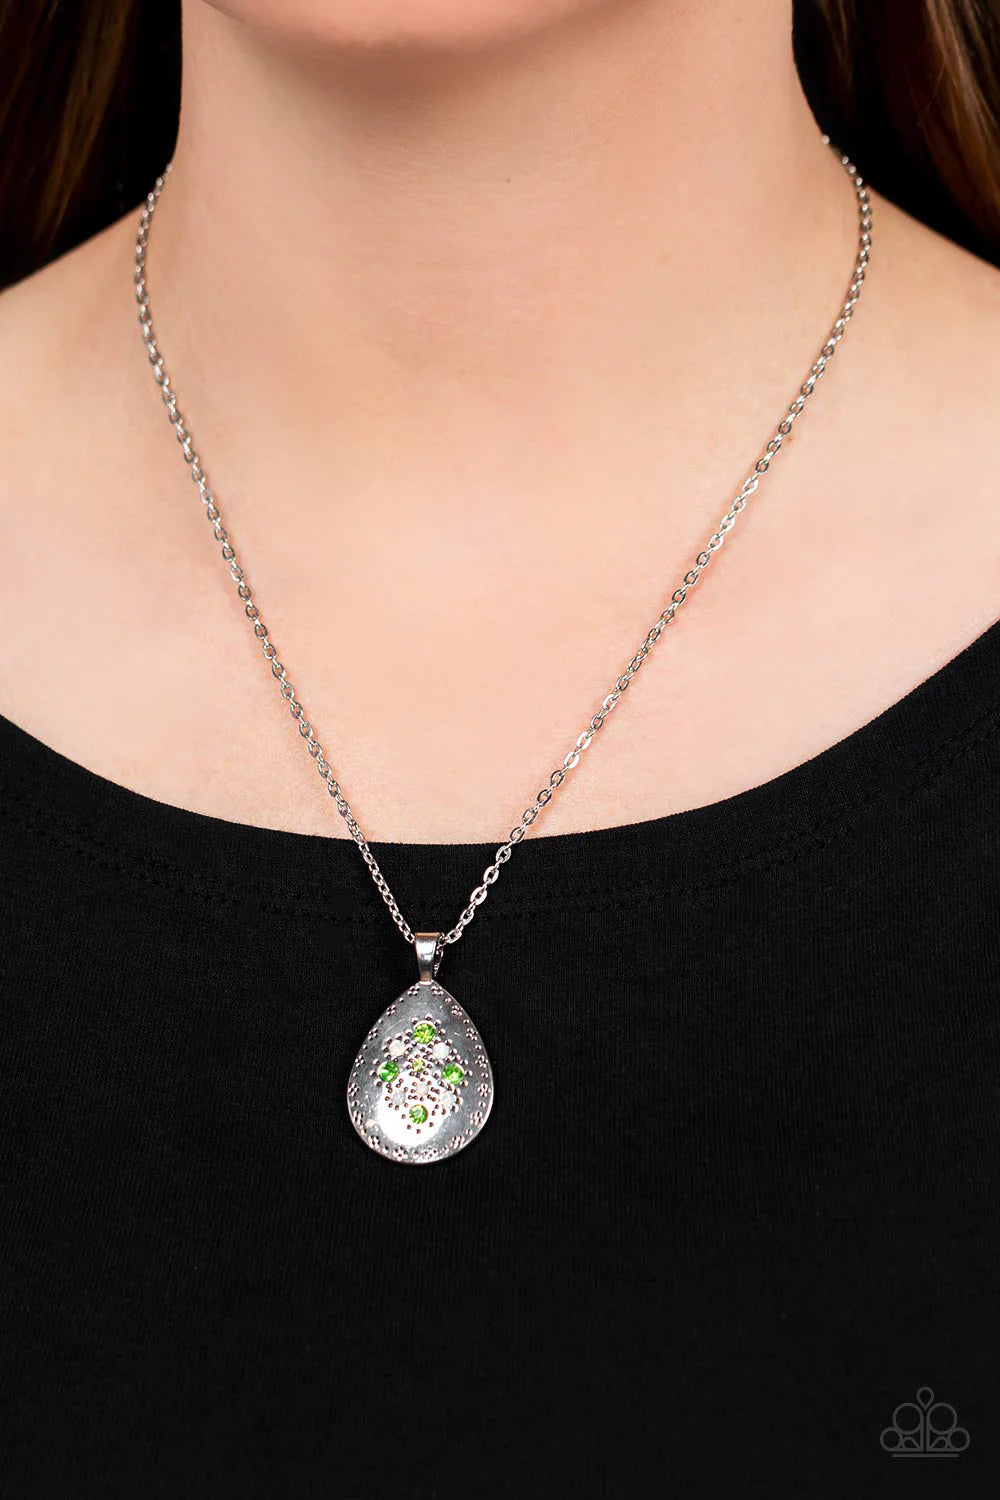 Paparazzi Accessories Cozy Cottage - Green Dainty green and opal rhinestones sparkle at the center of a silver teardrop pendant. Dotted in a subtle floral trim, the whimsical frame glides along a shiny silver chain below the collar for a seasonal look. Fe